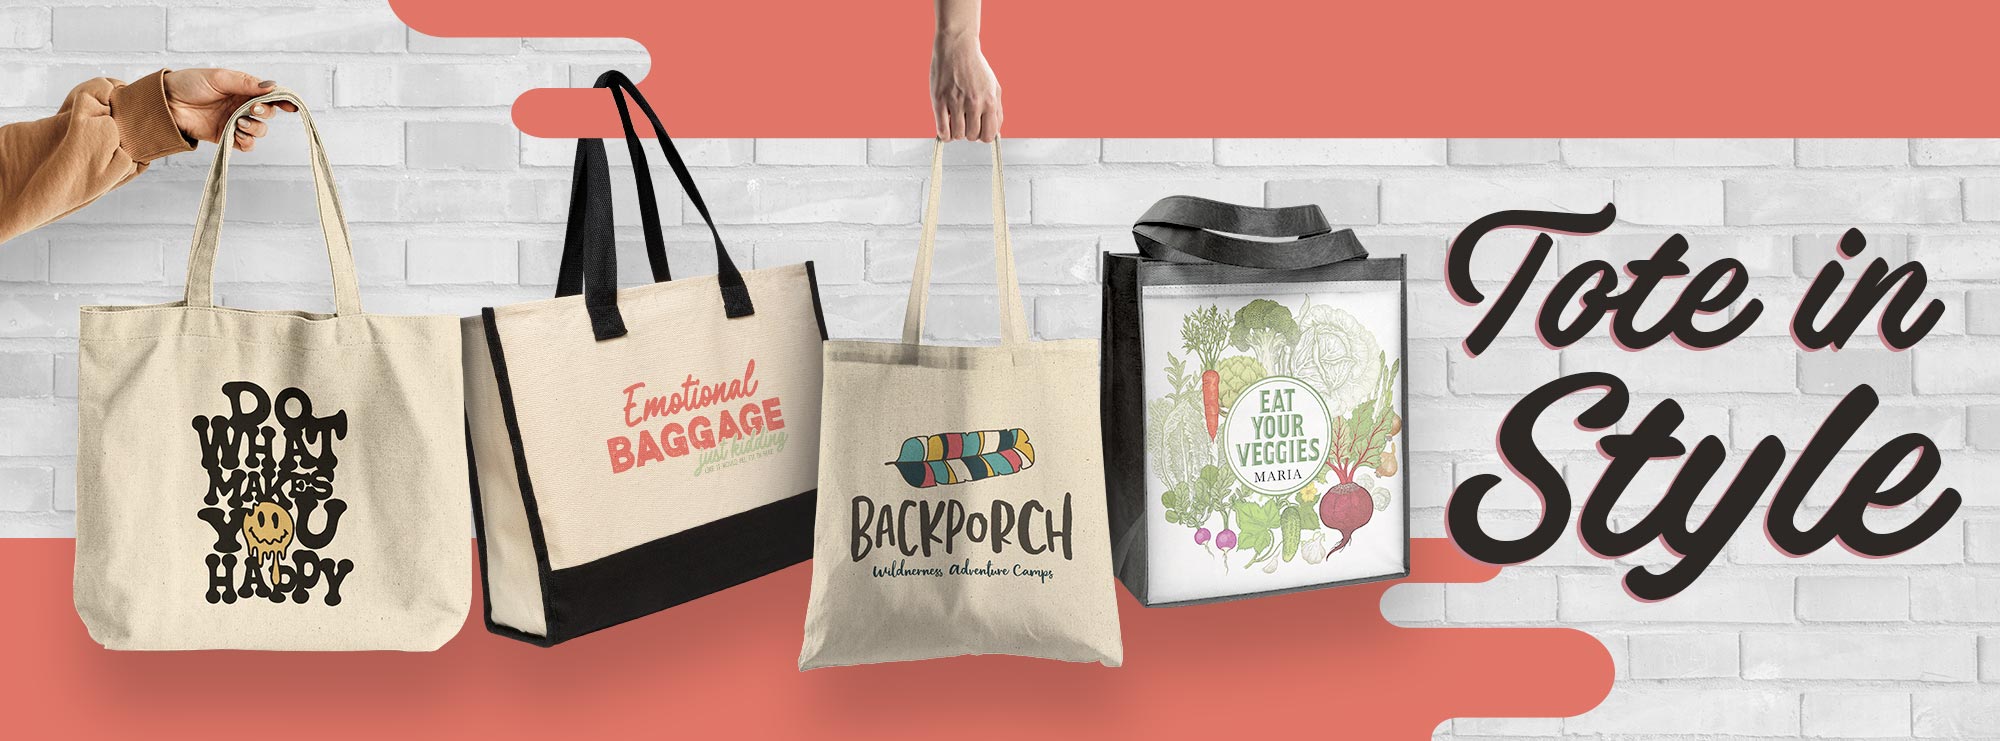 Tote-ally Awesome: Introducing Our Custom Tote Bag Collection!